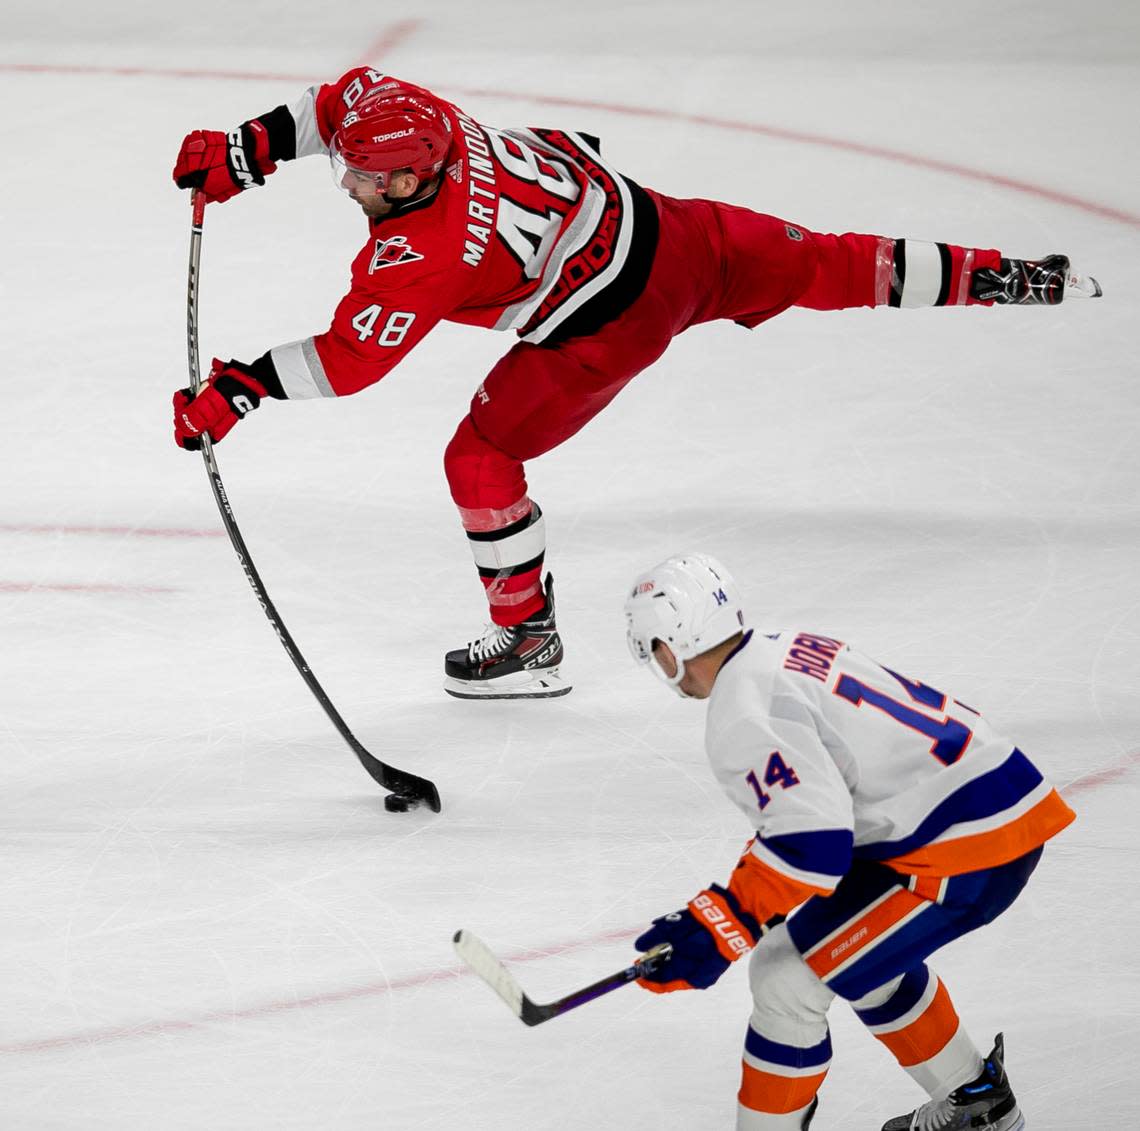 The Carolina Hurricanes Jordan Martinook (48) takes a shot on goal in the third period during Game 2 of their Stanley Cup series against the New York Islanders on Wednesday, April 19, 2023 at PNC Arena in Raleigh, N.C.